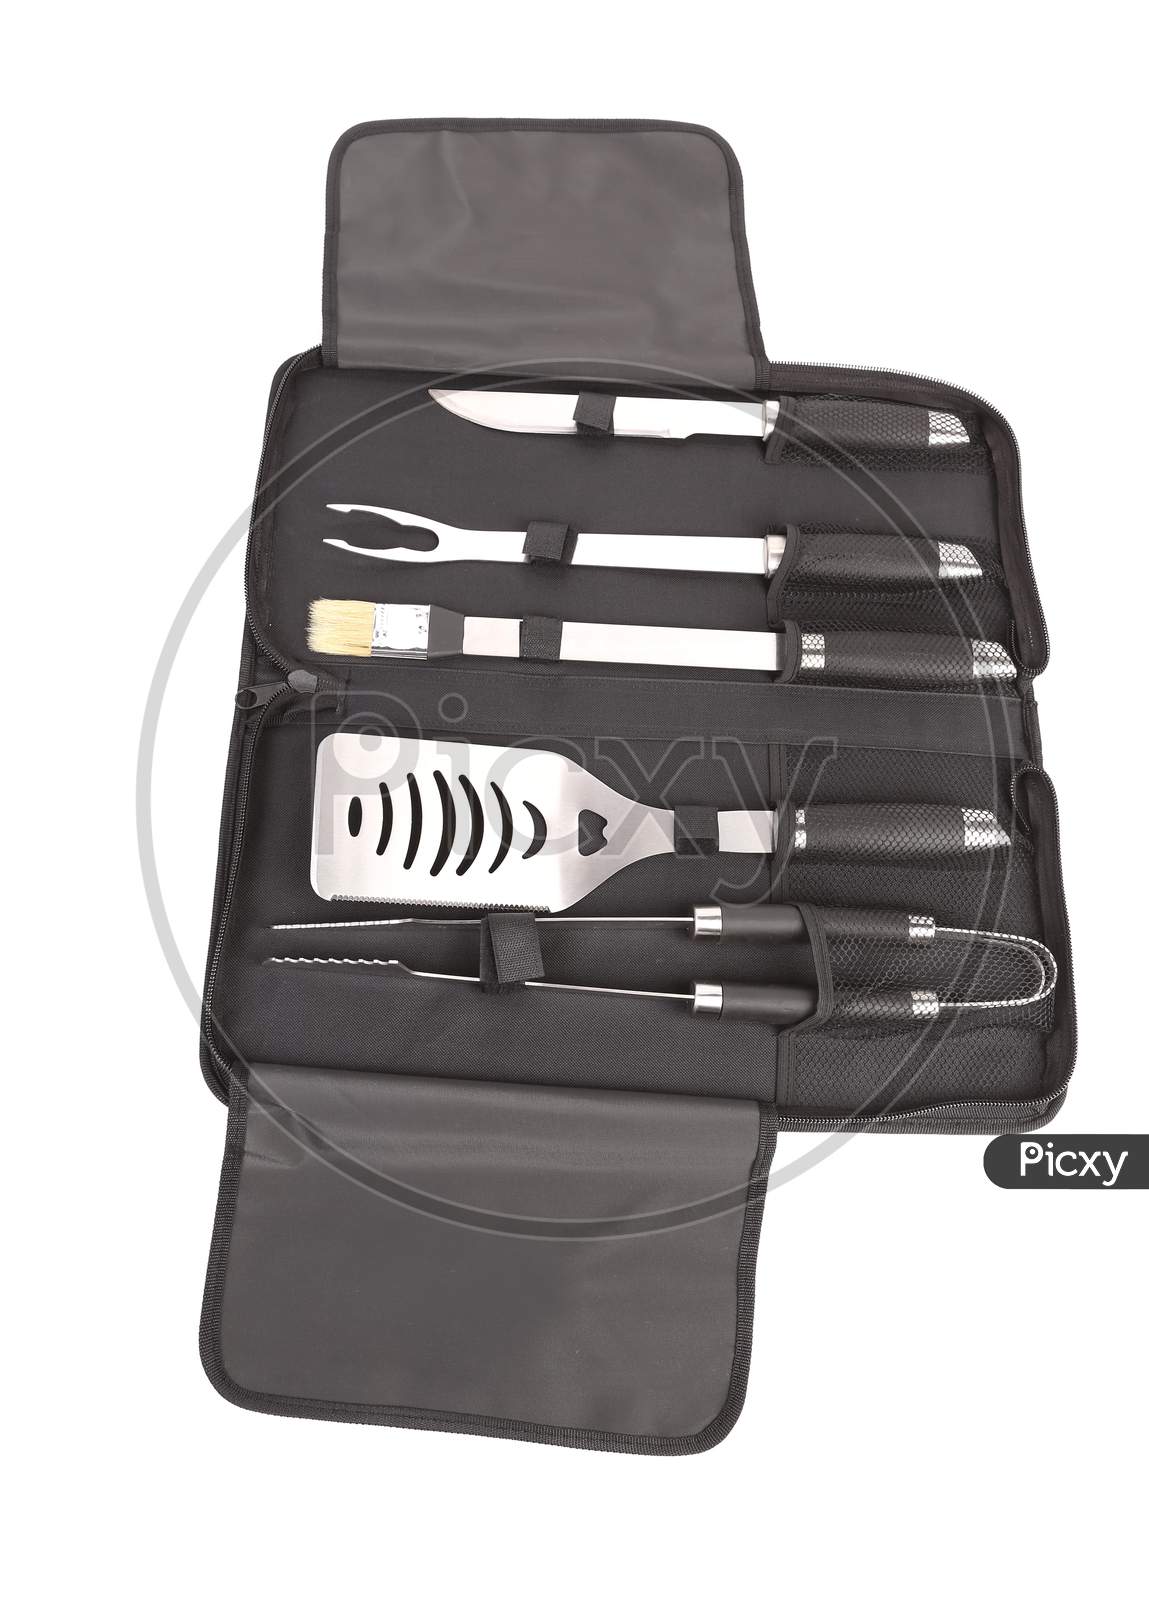 Set Of Tools For Bbq In Black Bag. Isolated On A White Background.